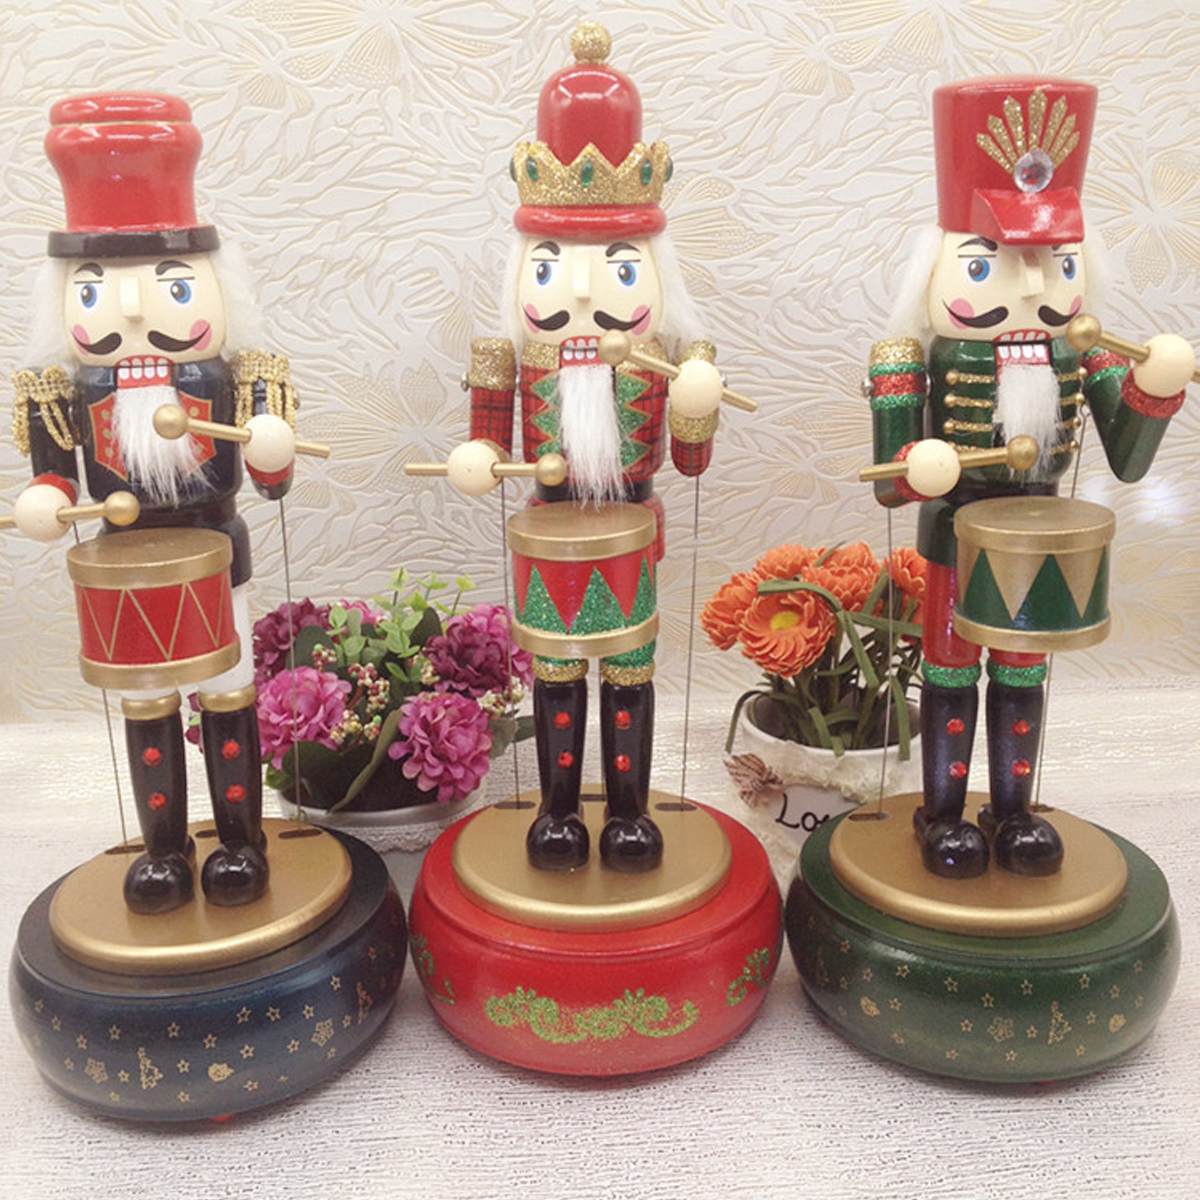 32CM-Wooden-Guard-Nutcracker-Soldier-Toy-Music-Box-Christmas-Decorations-Xmas-Gift-1605612-2